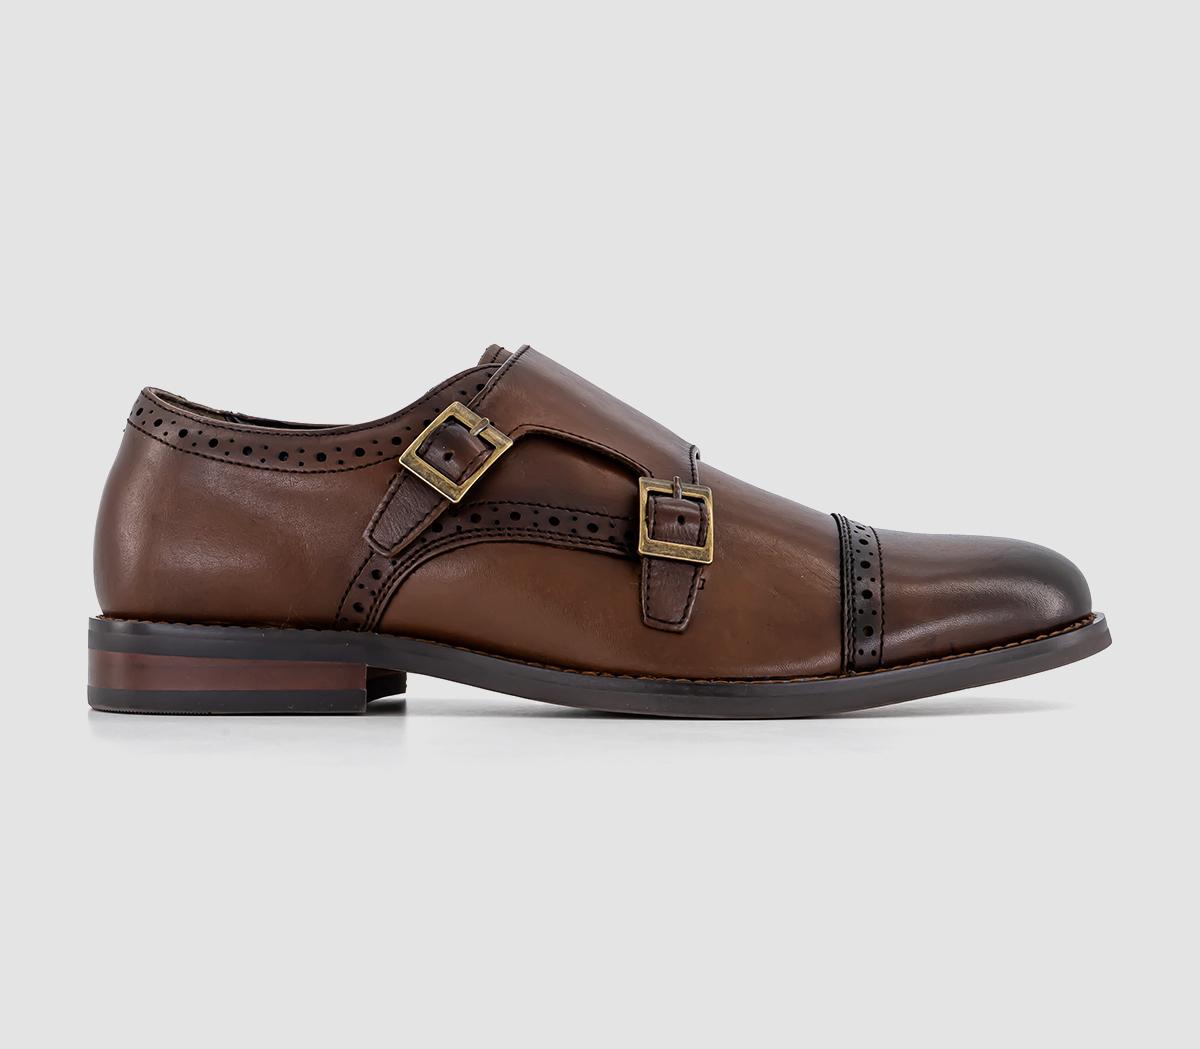 OFFICEMyles Double Strap Monk ShoesBrown Leather